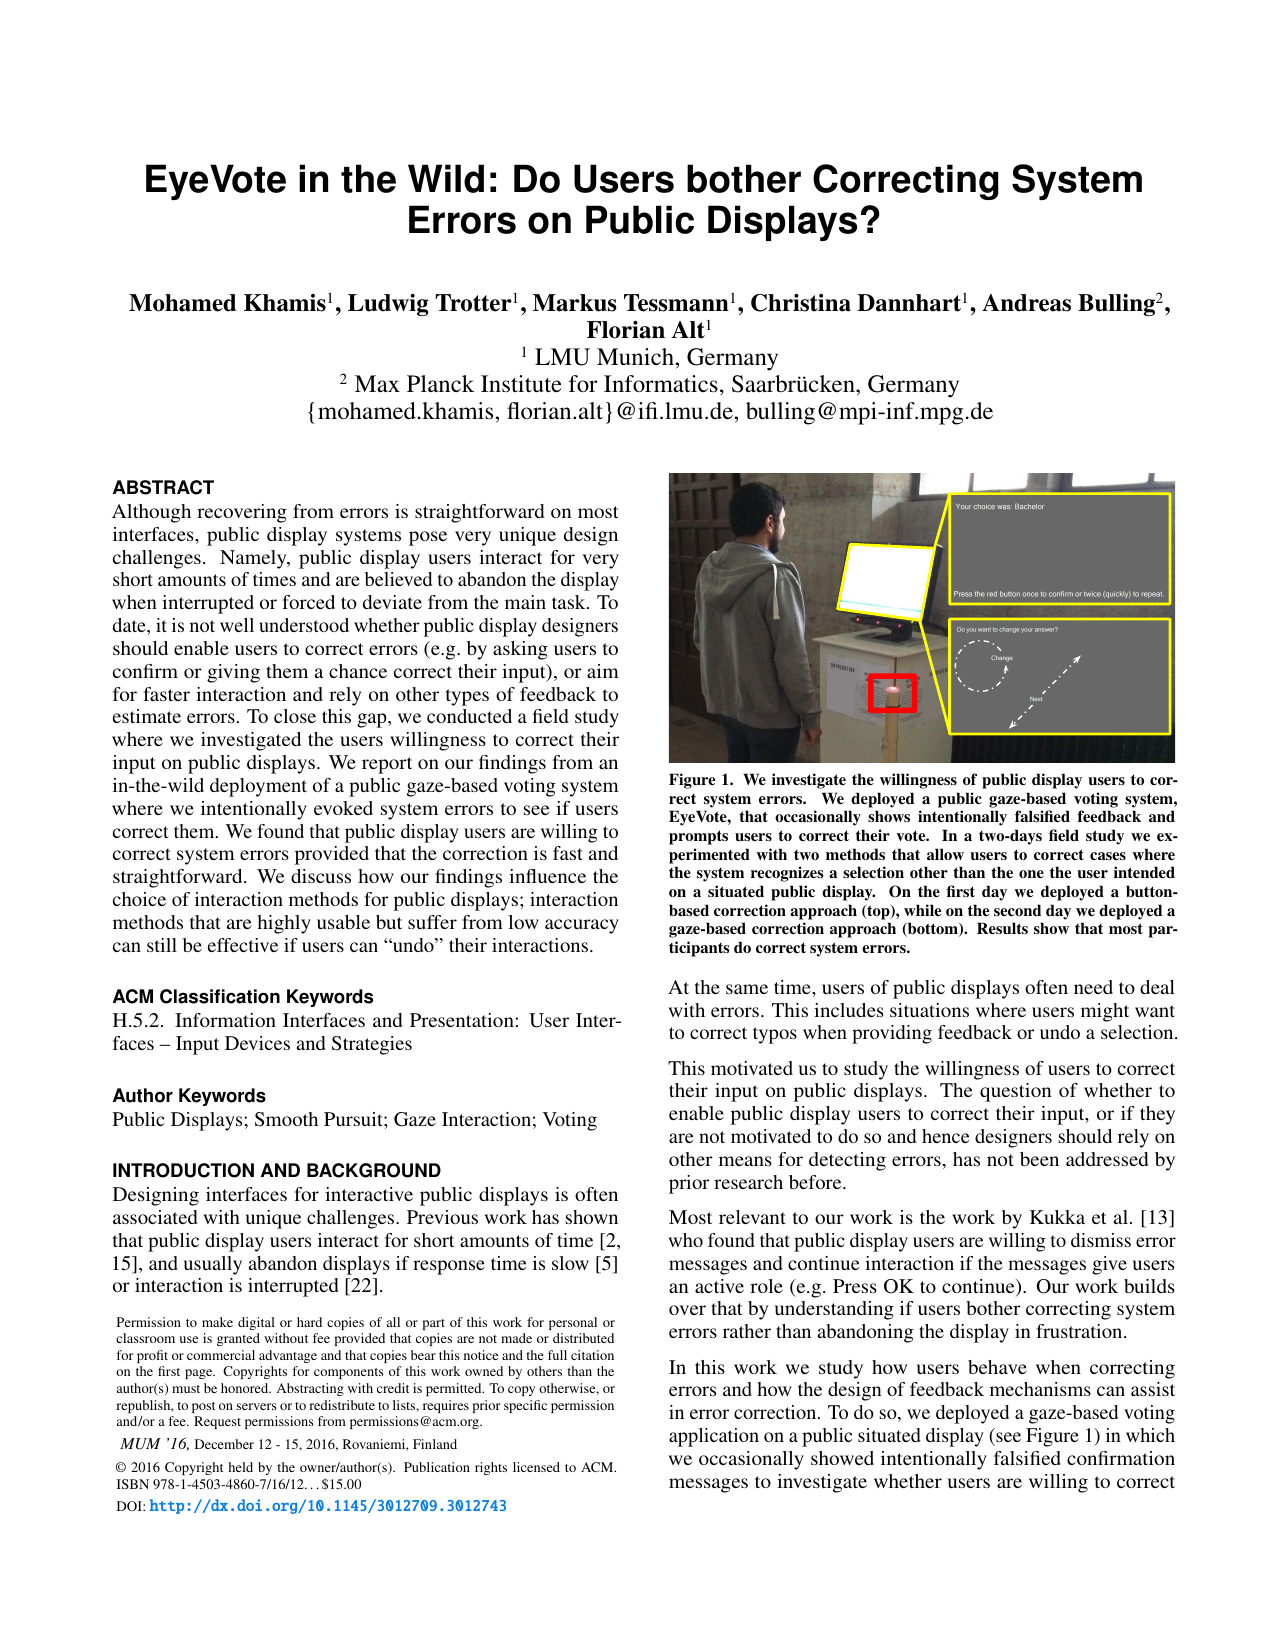 EyeVote in the Wild: Do Users bother Correcting System Errors on Public Displays?